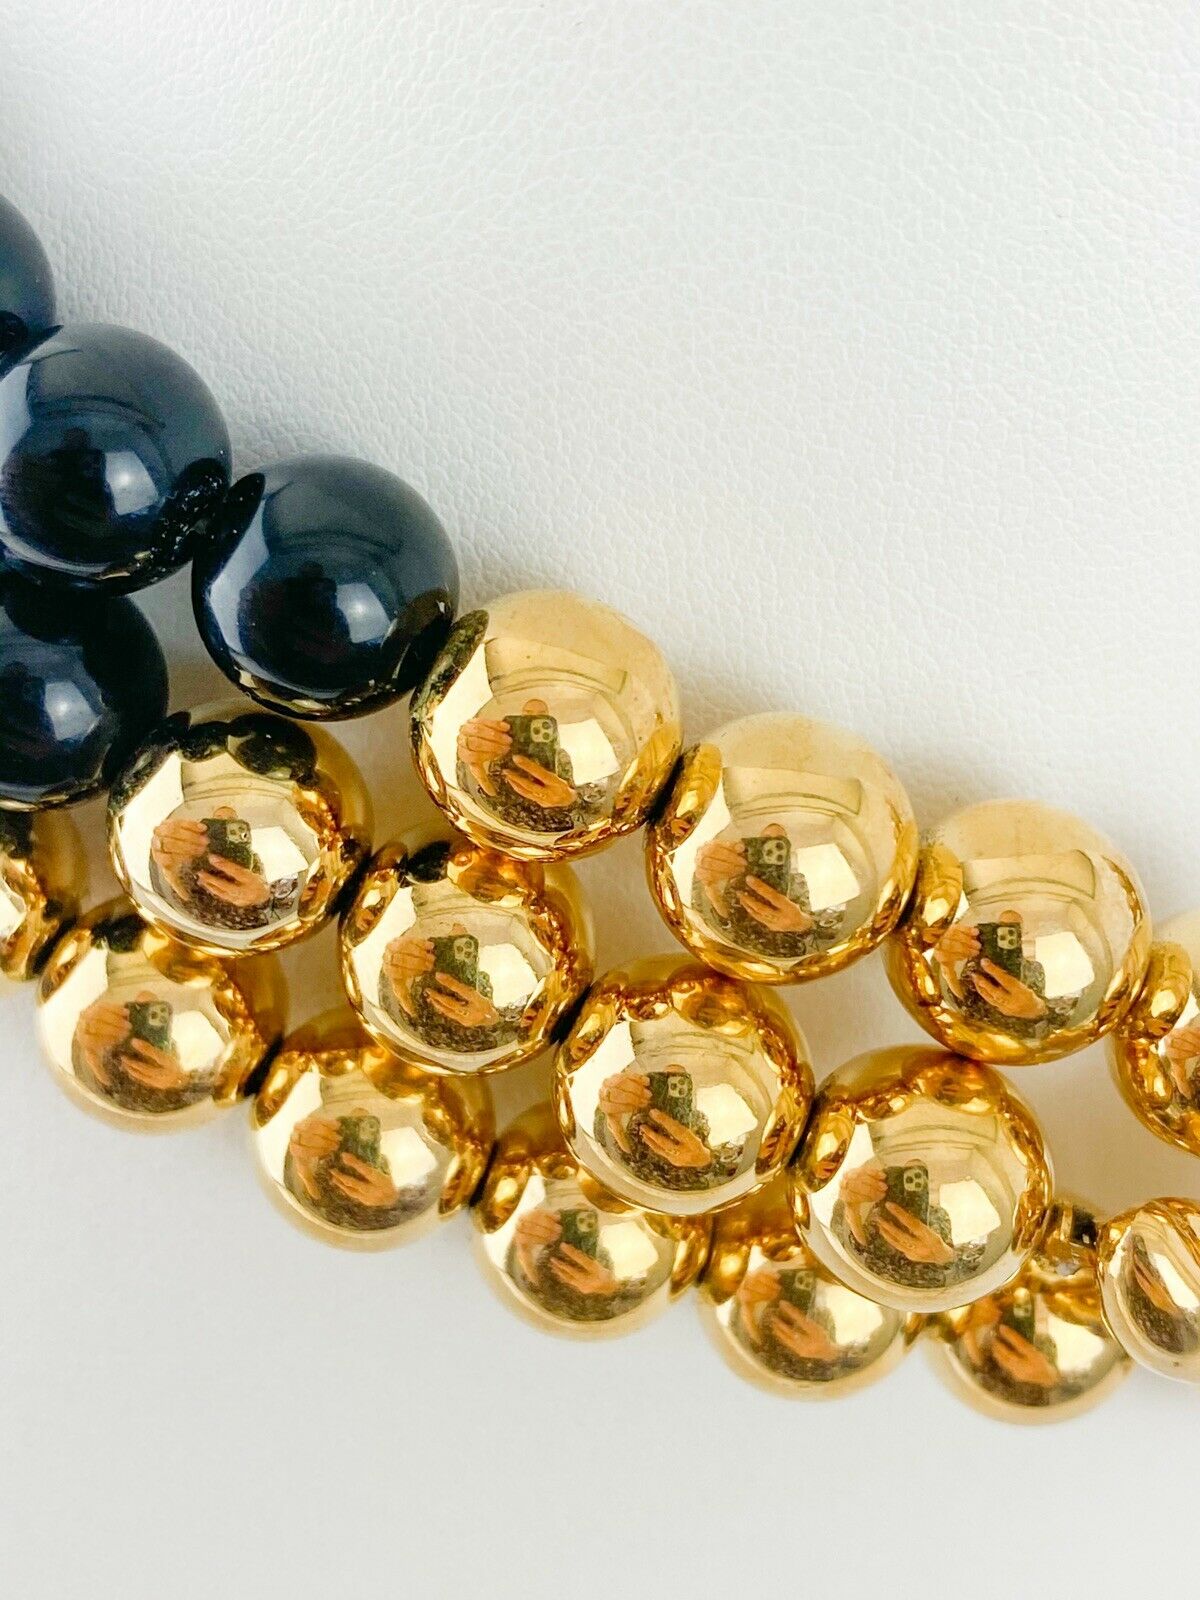 【SOLD OUT】Bijoux Givenchy Paris New York Vintage Multi-strand Beaded Necklace Black